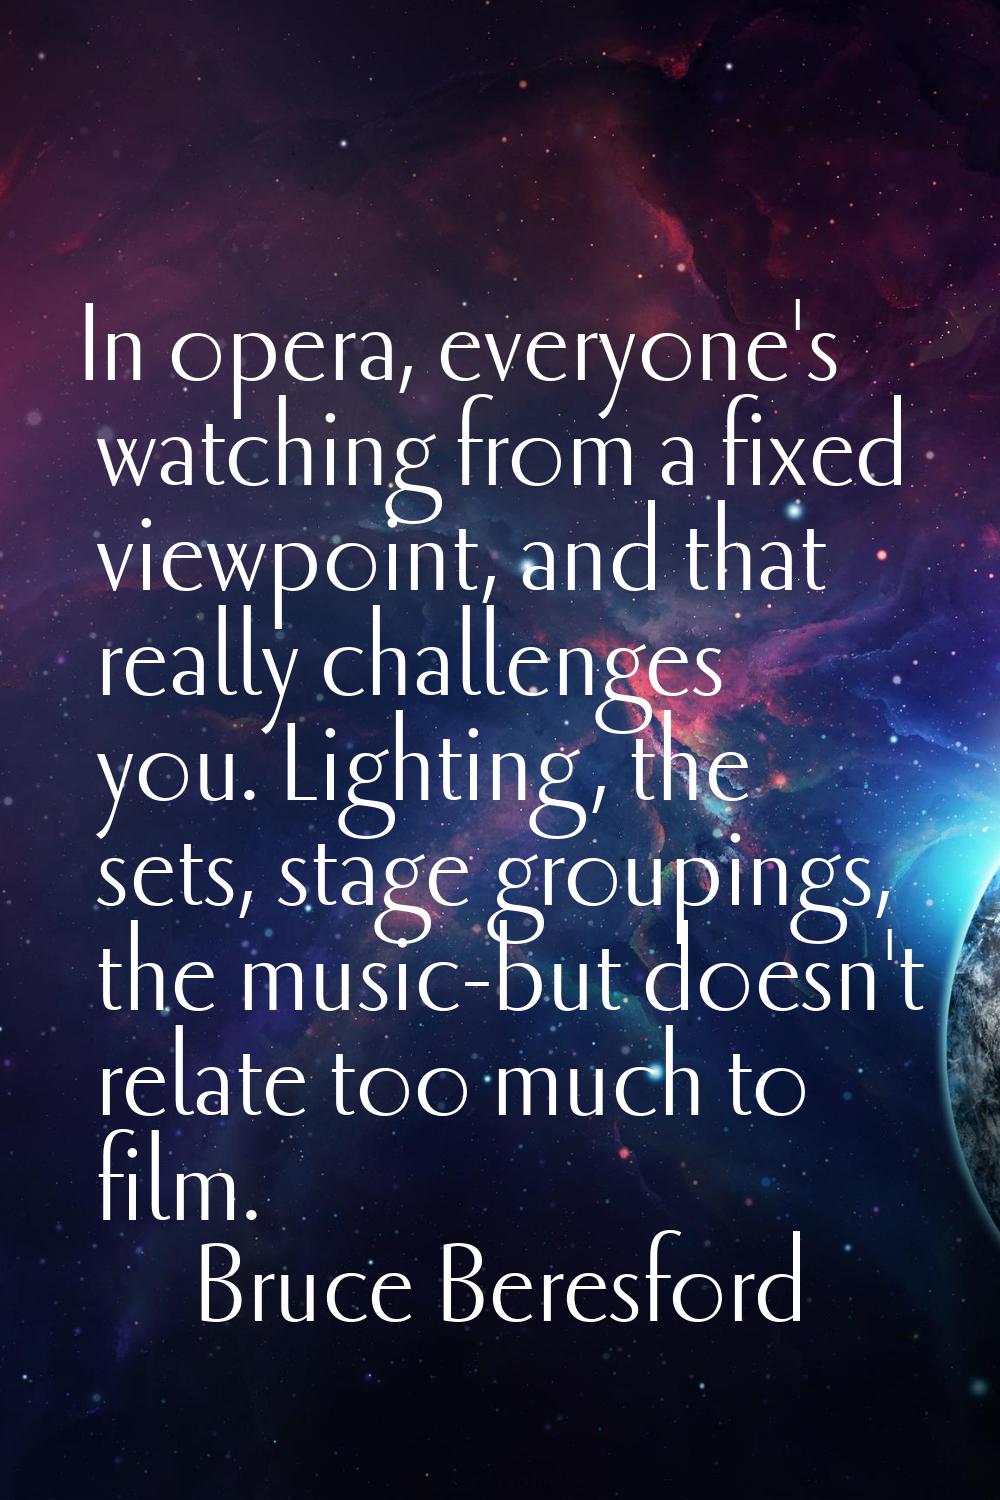 In opera, everyone's watching from a fixed viewpoint, and that really challenges you. Lighting, the